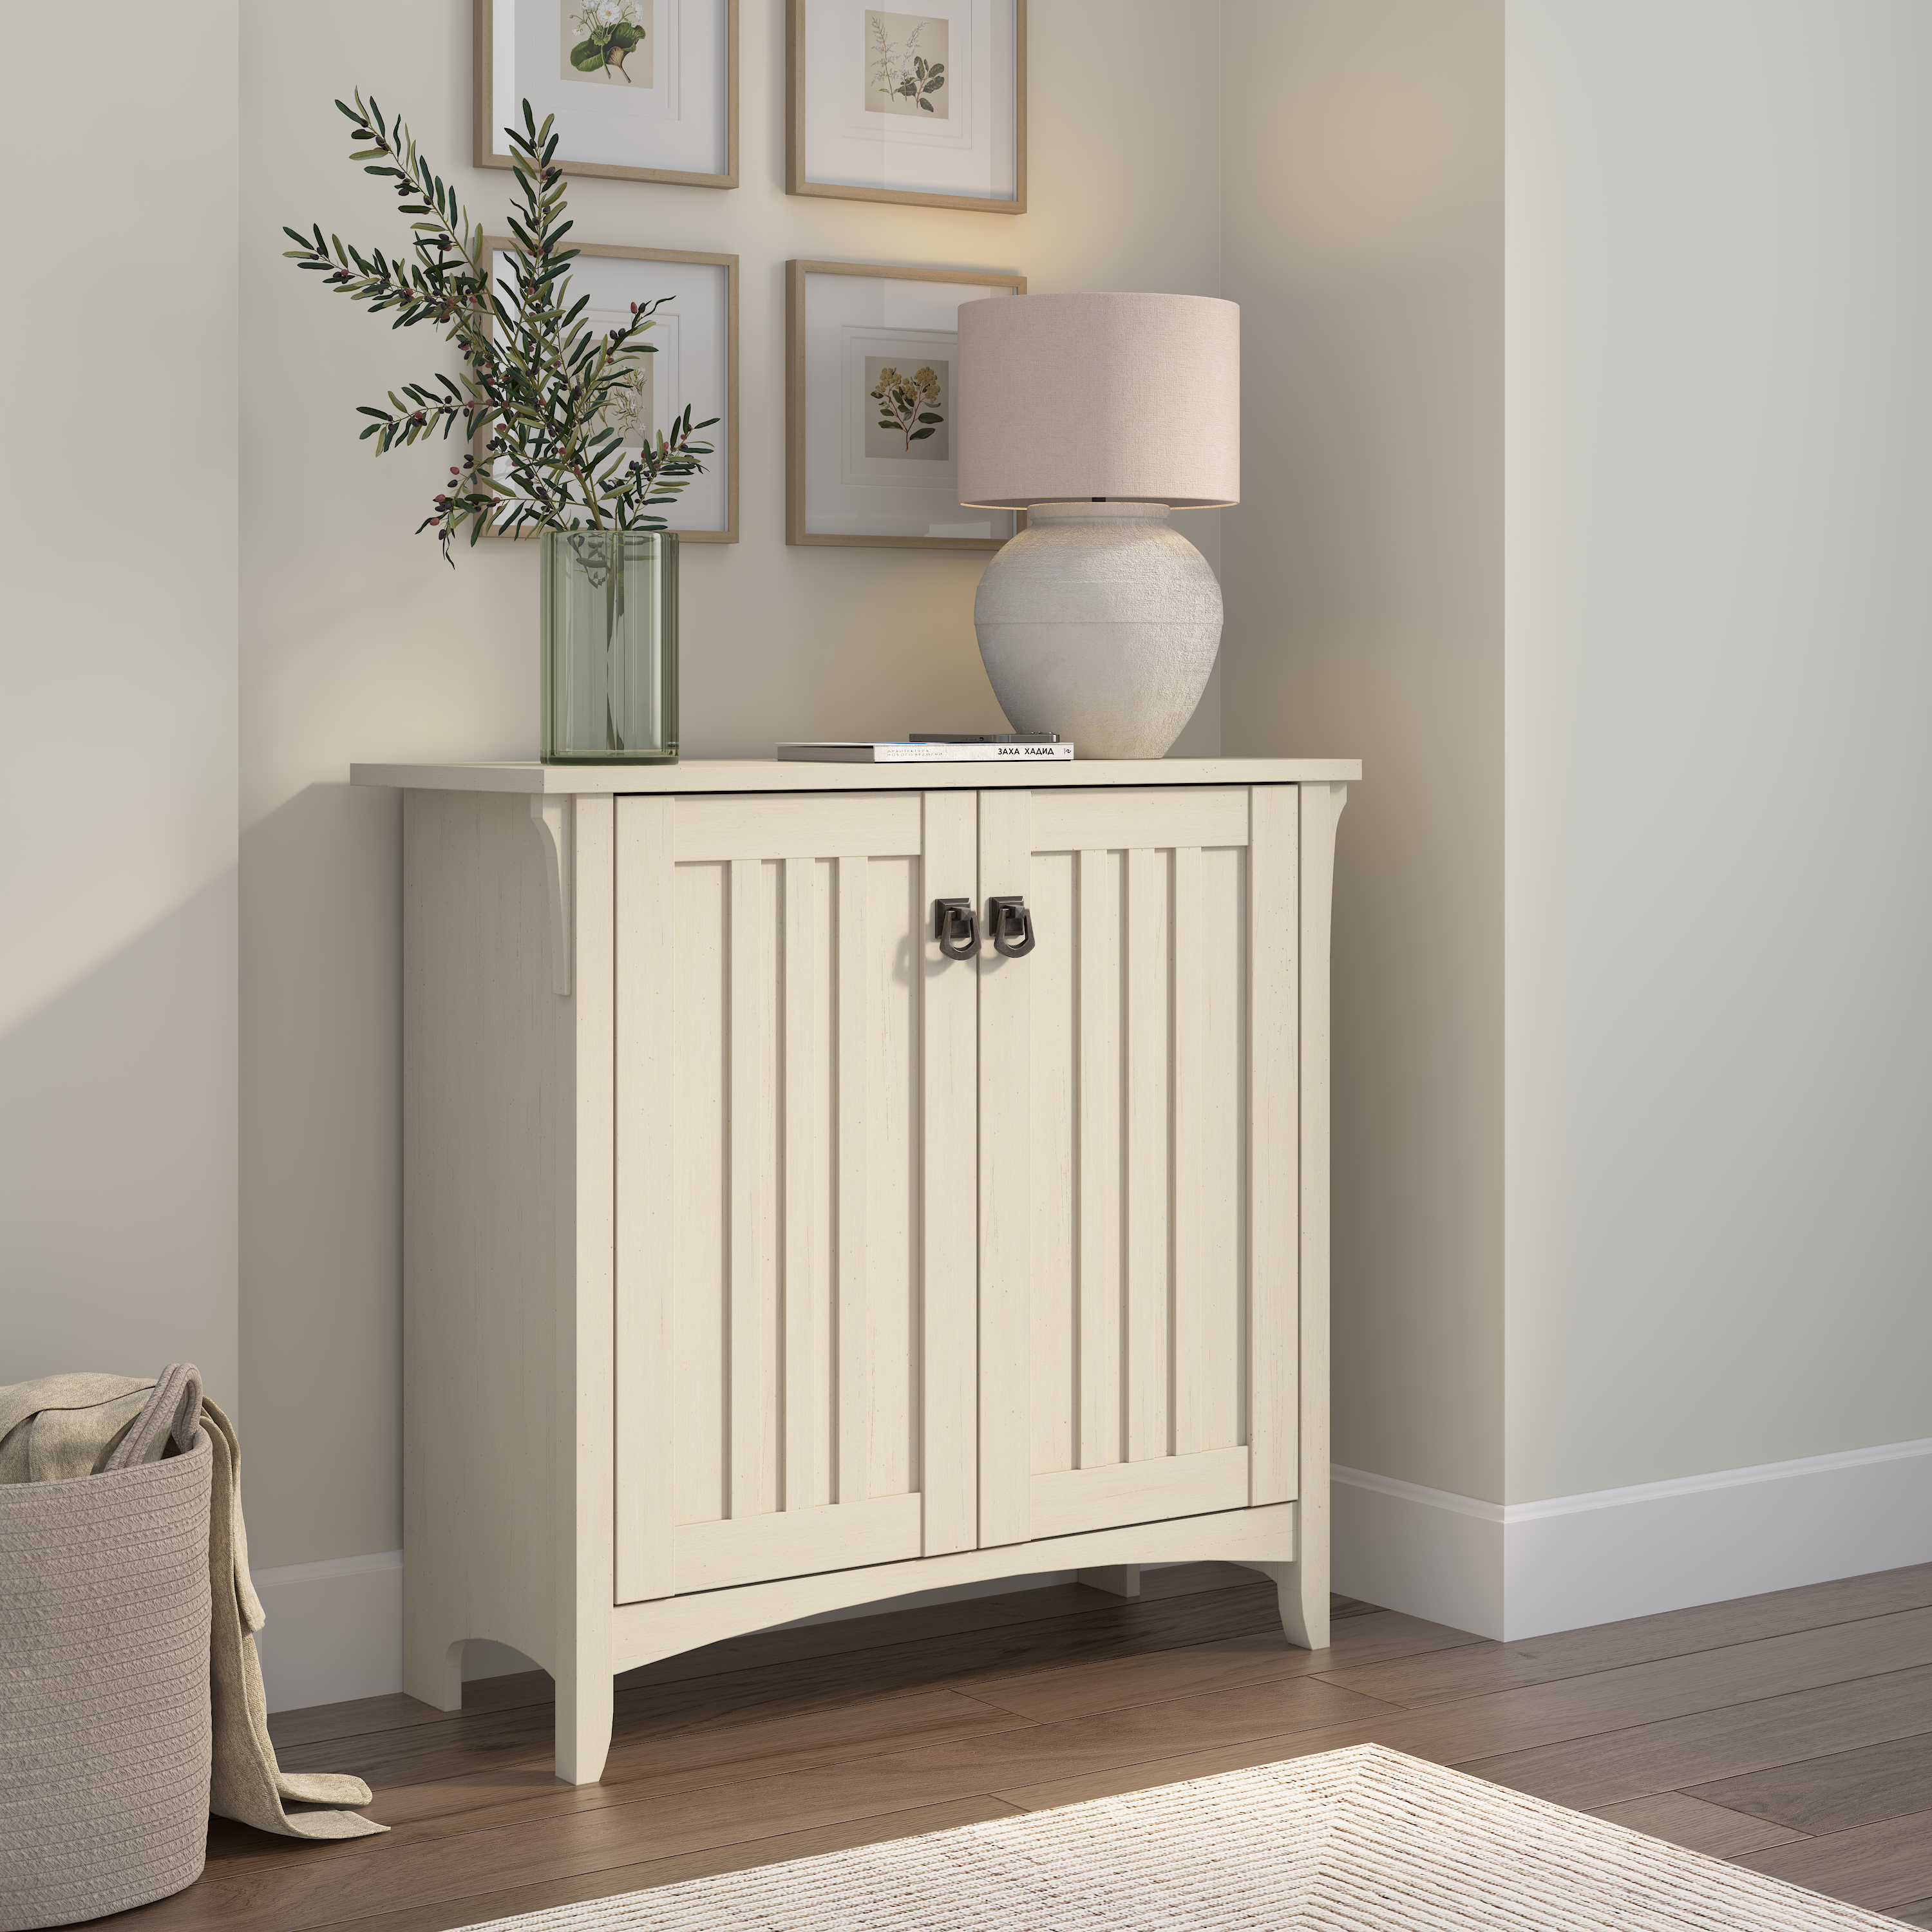 Shop Bush Furniture Salinas Small Storage Cabinet with Doors and Shelves 01 SAS632AW-03 #color_antique white